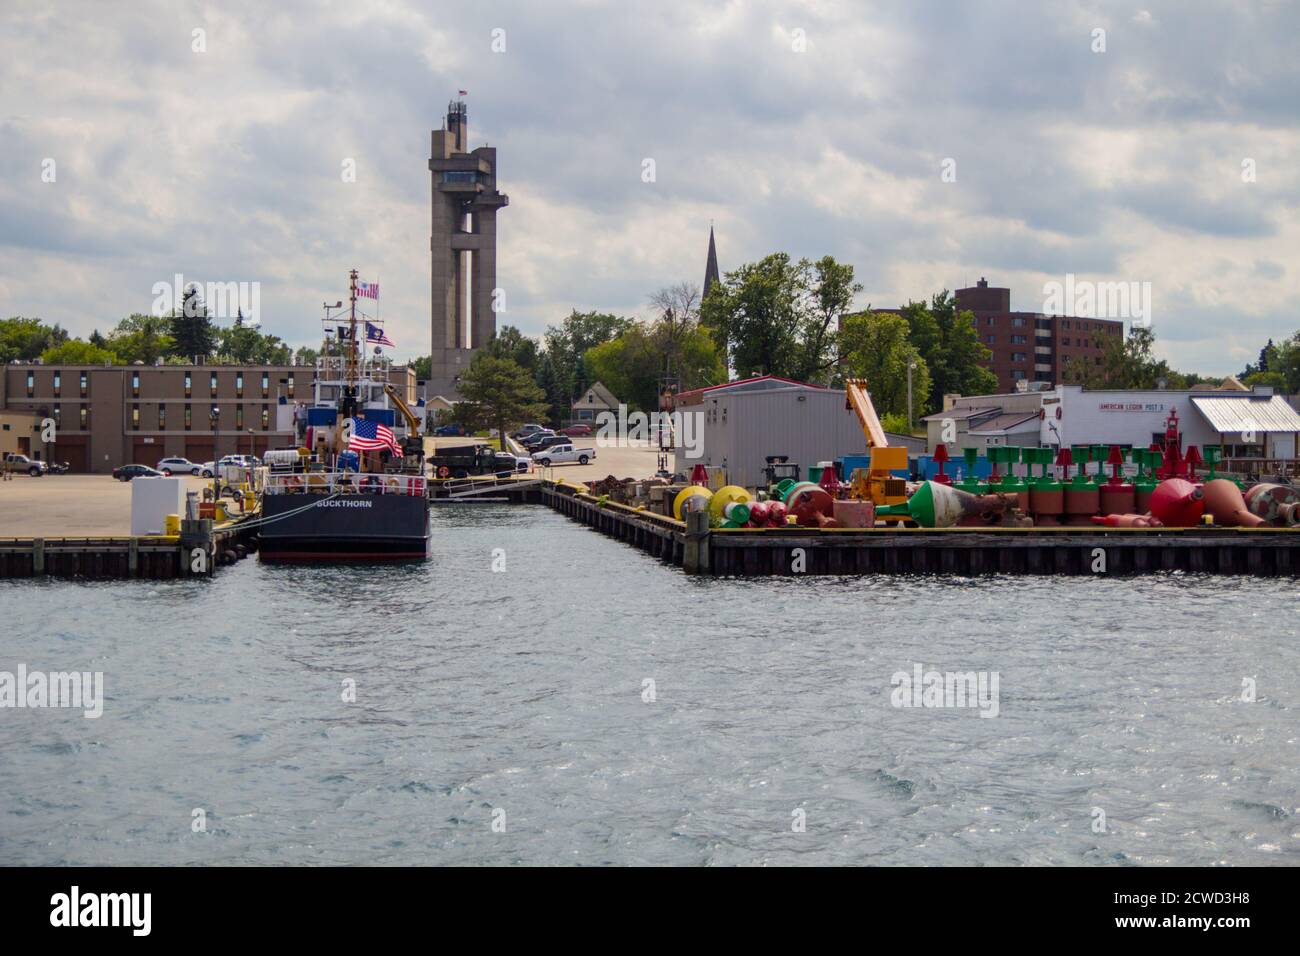 Sault Ste Marie, Michigan, USA - August 9, 2015: The downtown waterfront district of Sault Ste Marie on the shore of the St Marys River. Stock Photo